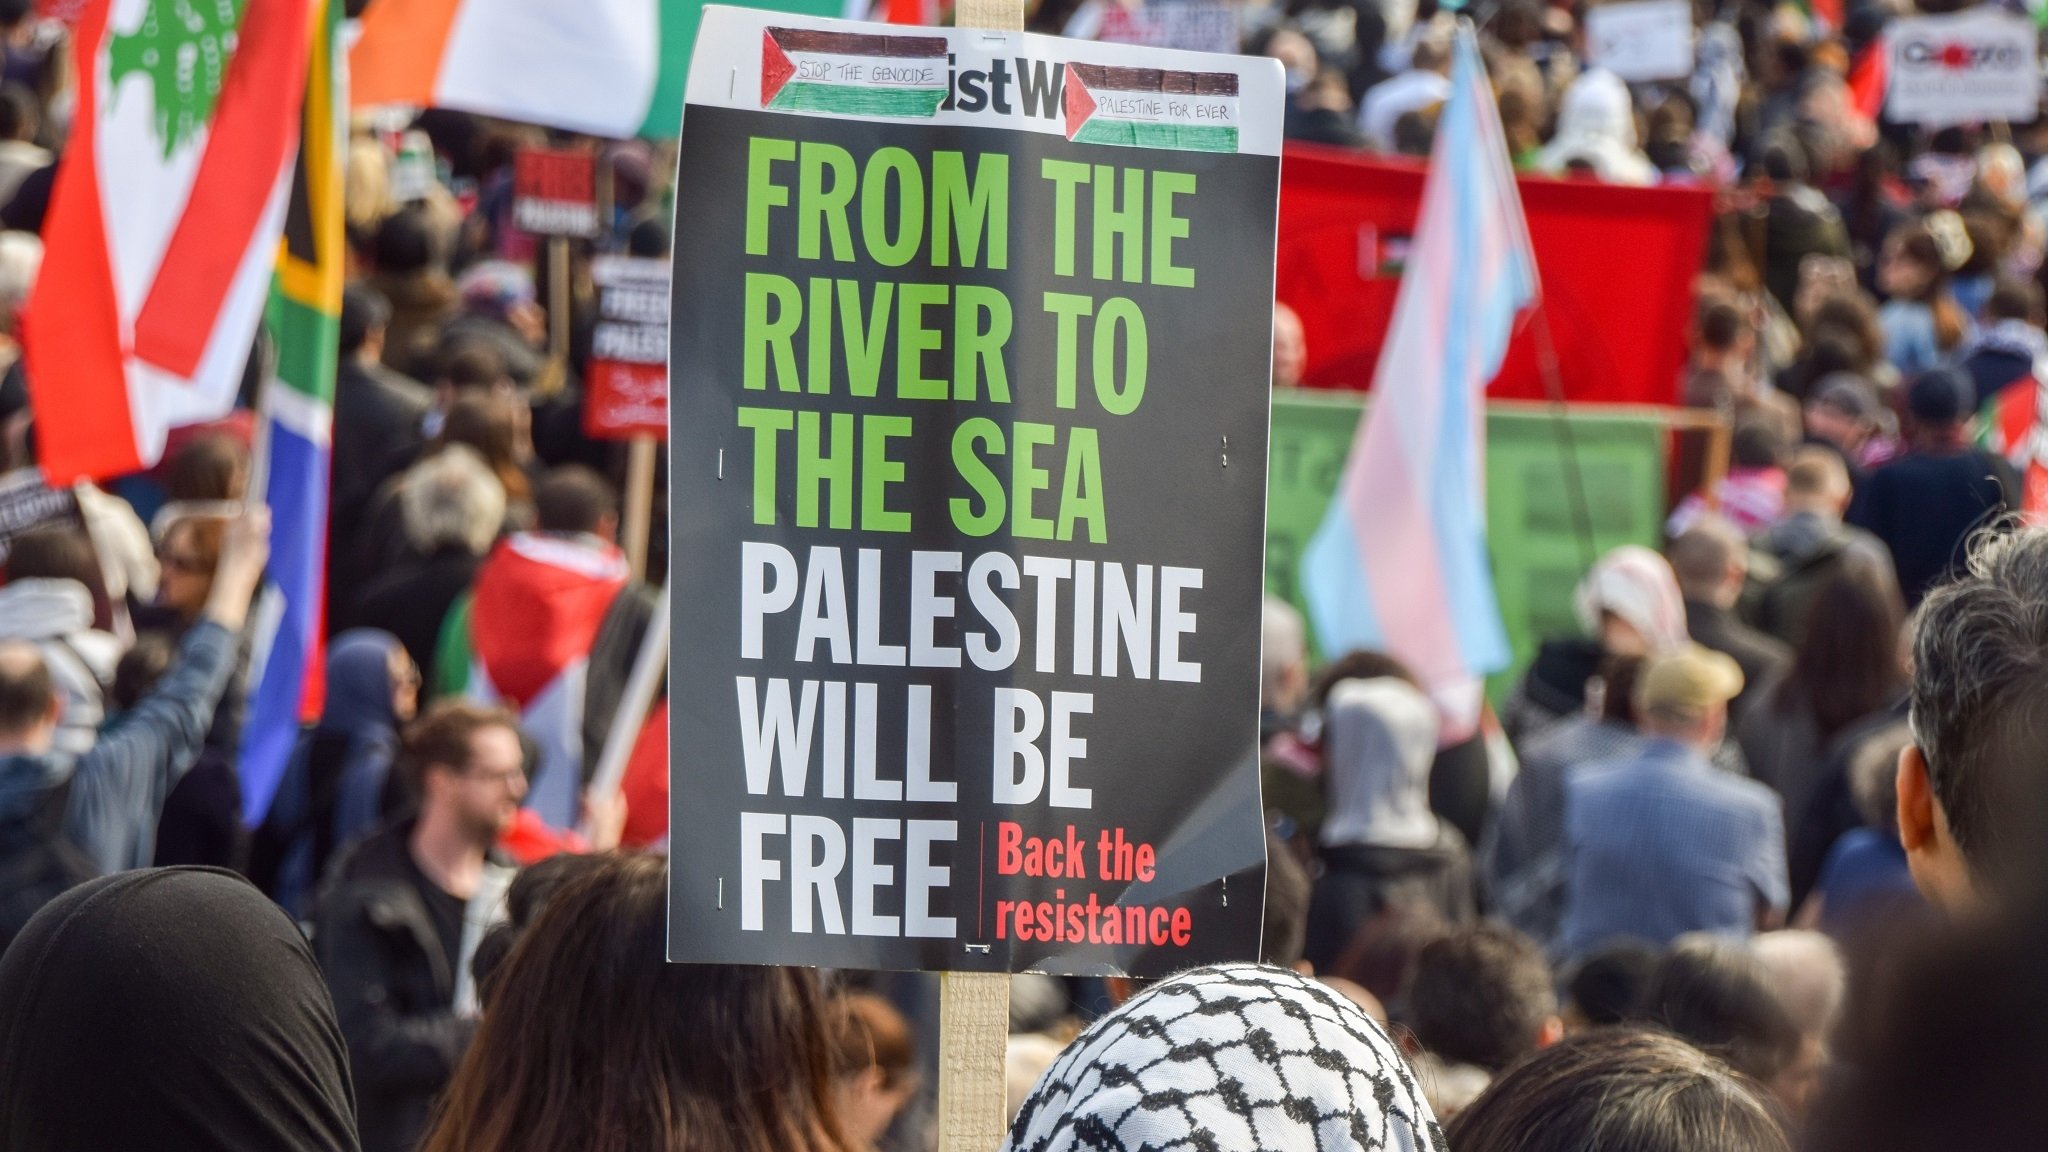 Plakat mit dem Slogan "From the River to the Sea, Palestine will be free"